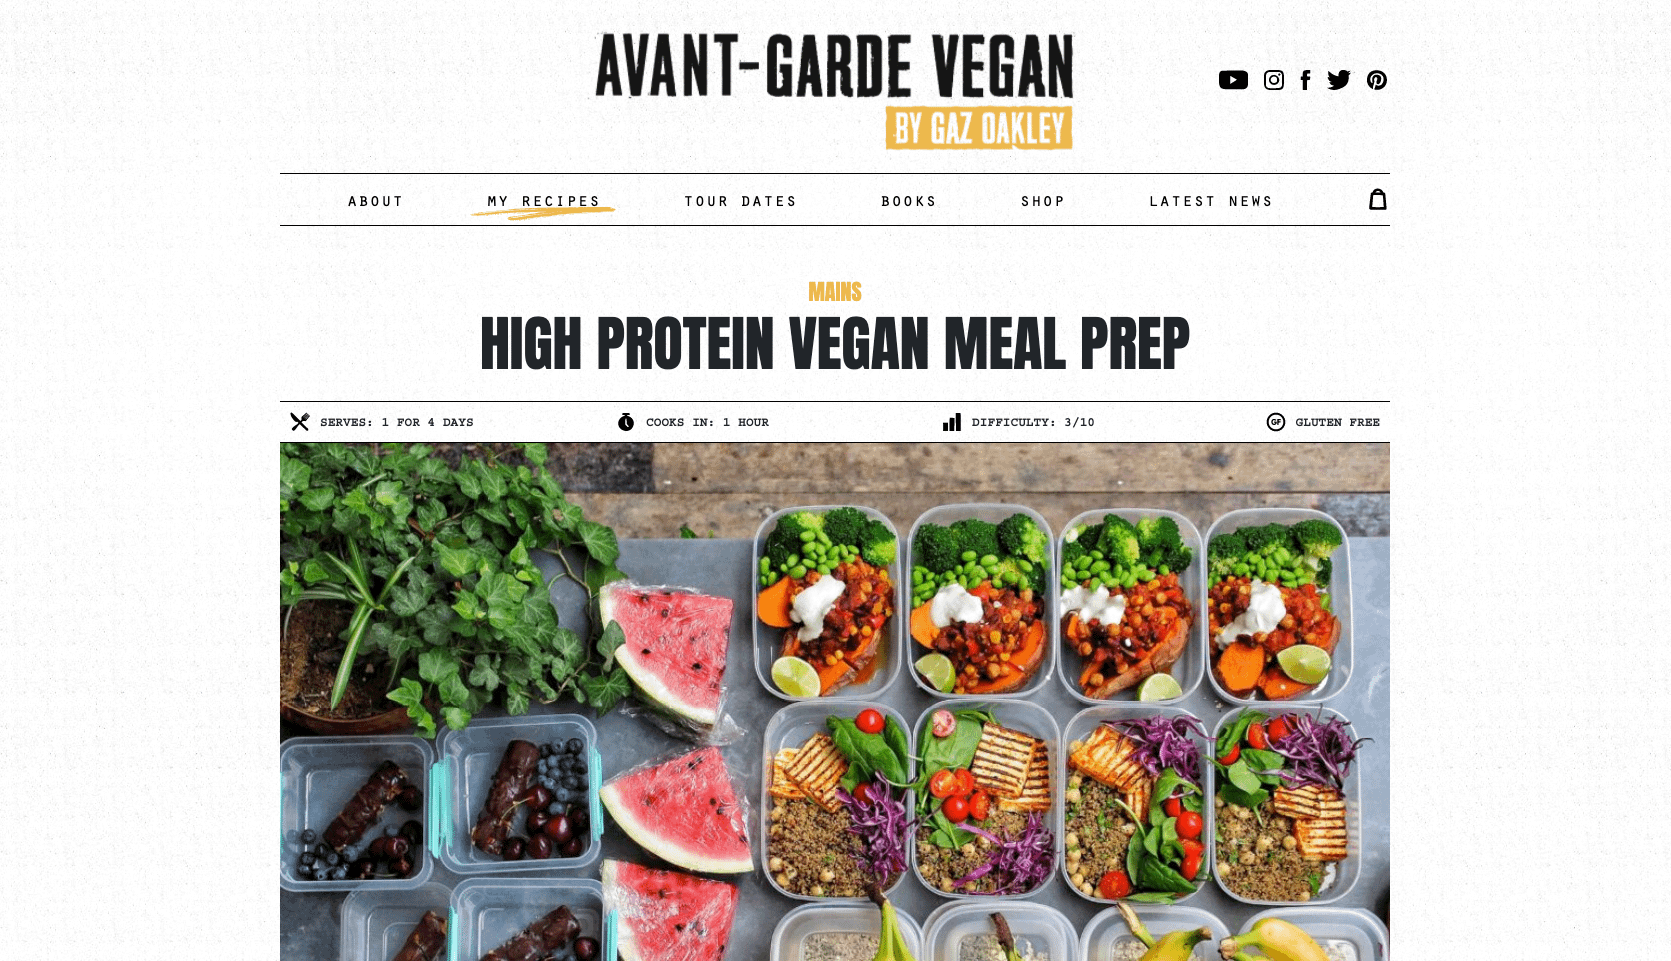 Need more protein when going vegan? No problem, High Protein Vegan Meal Prep by Gaz Oakley